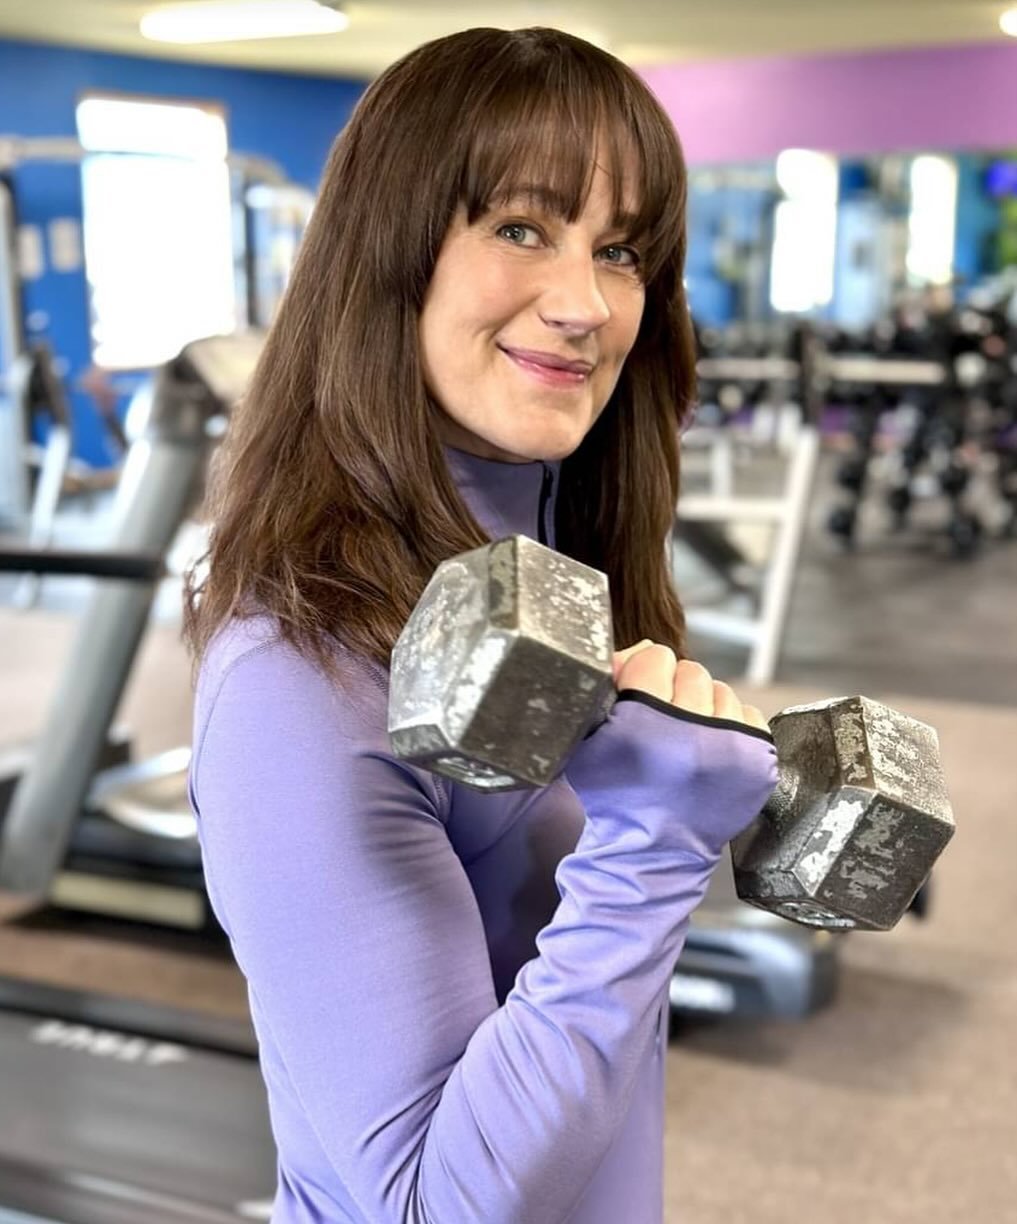 If you have a Facebook account and a few moments to spare, check out this link and vote for Wendy to be on the cover of Ms. Health &amp; Fitness magazine. http://mshealthandfit.com/2024/wendy-gustin